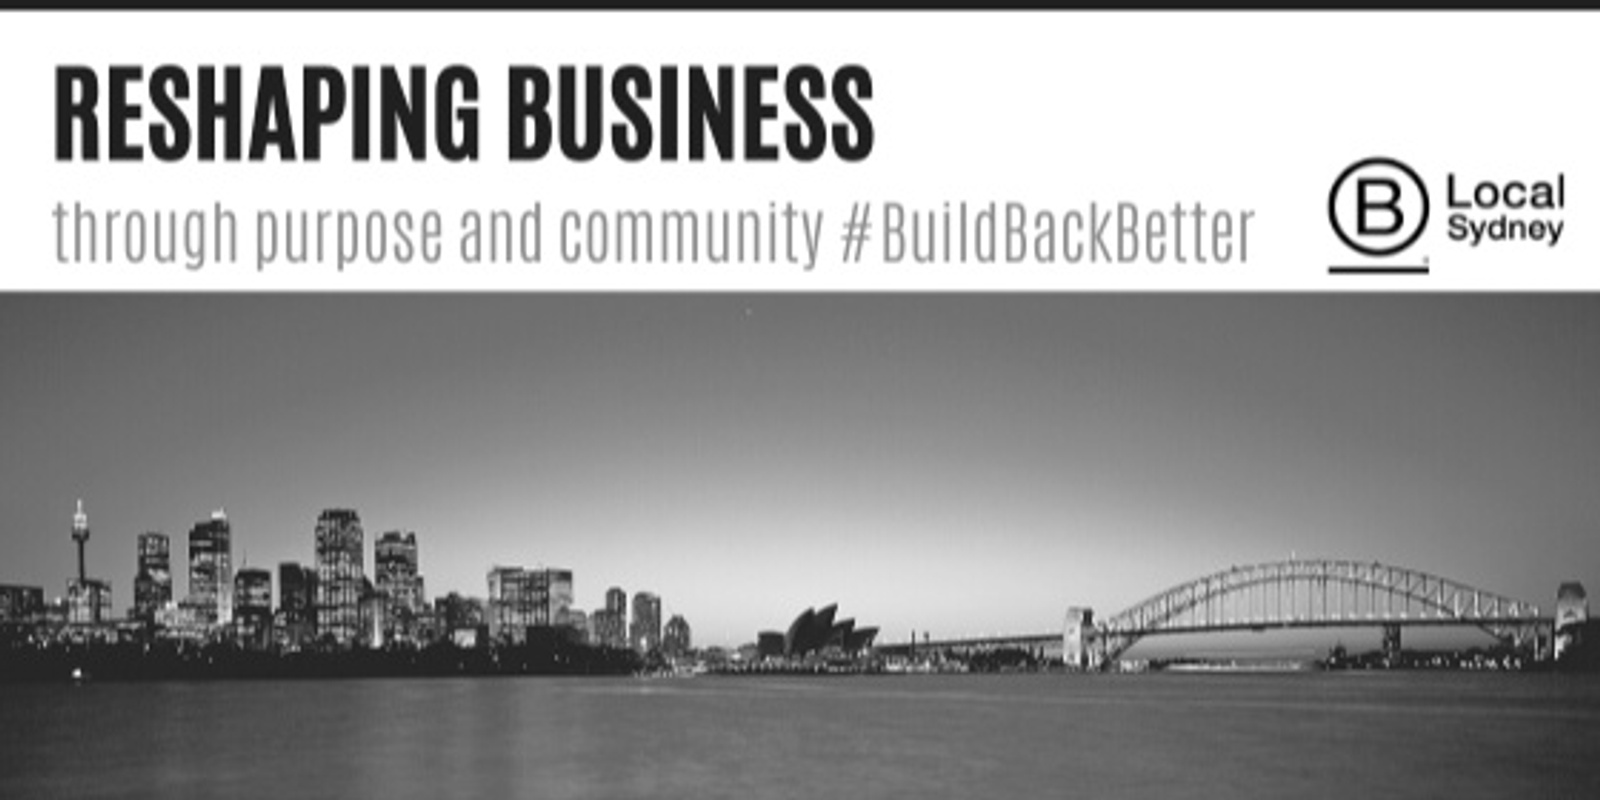 Banner image for B Corp Panel Event - 23 July. Reshaping business through purpose and community #BuildBackBetter